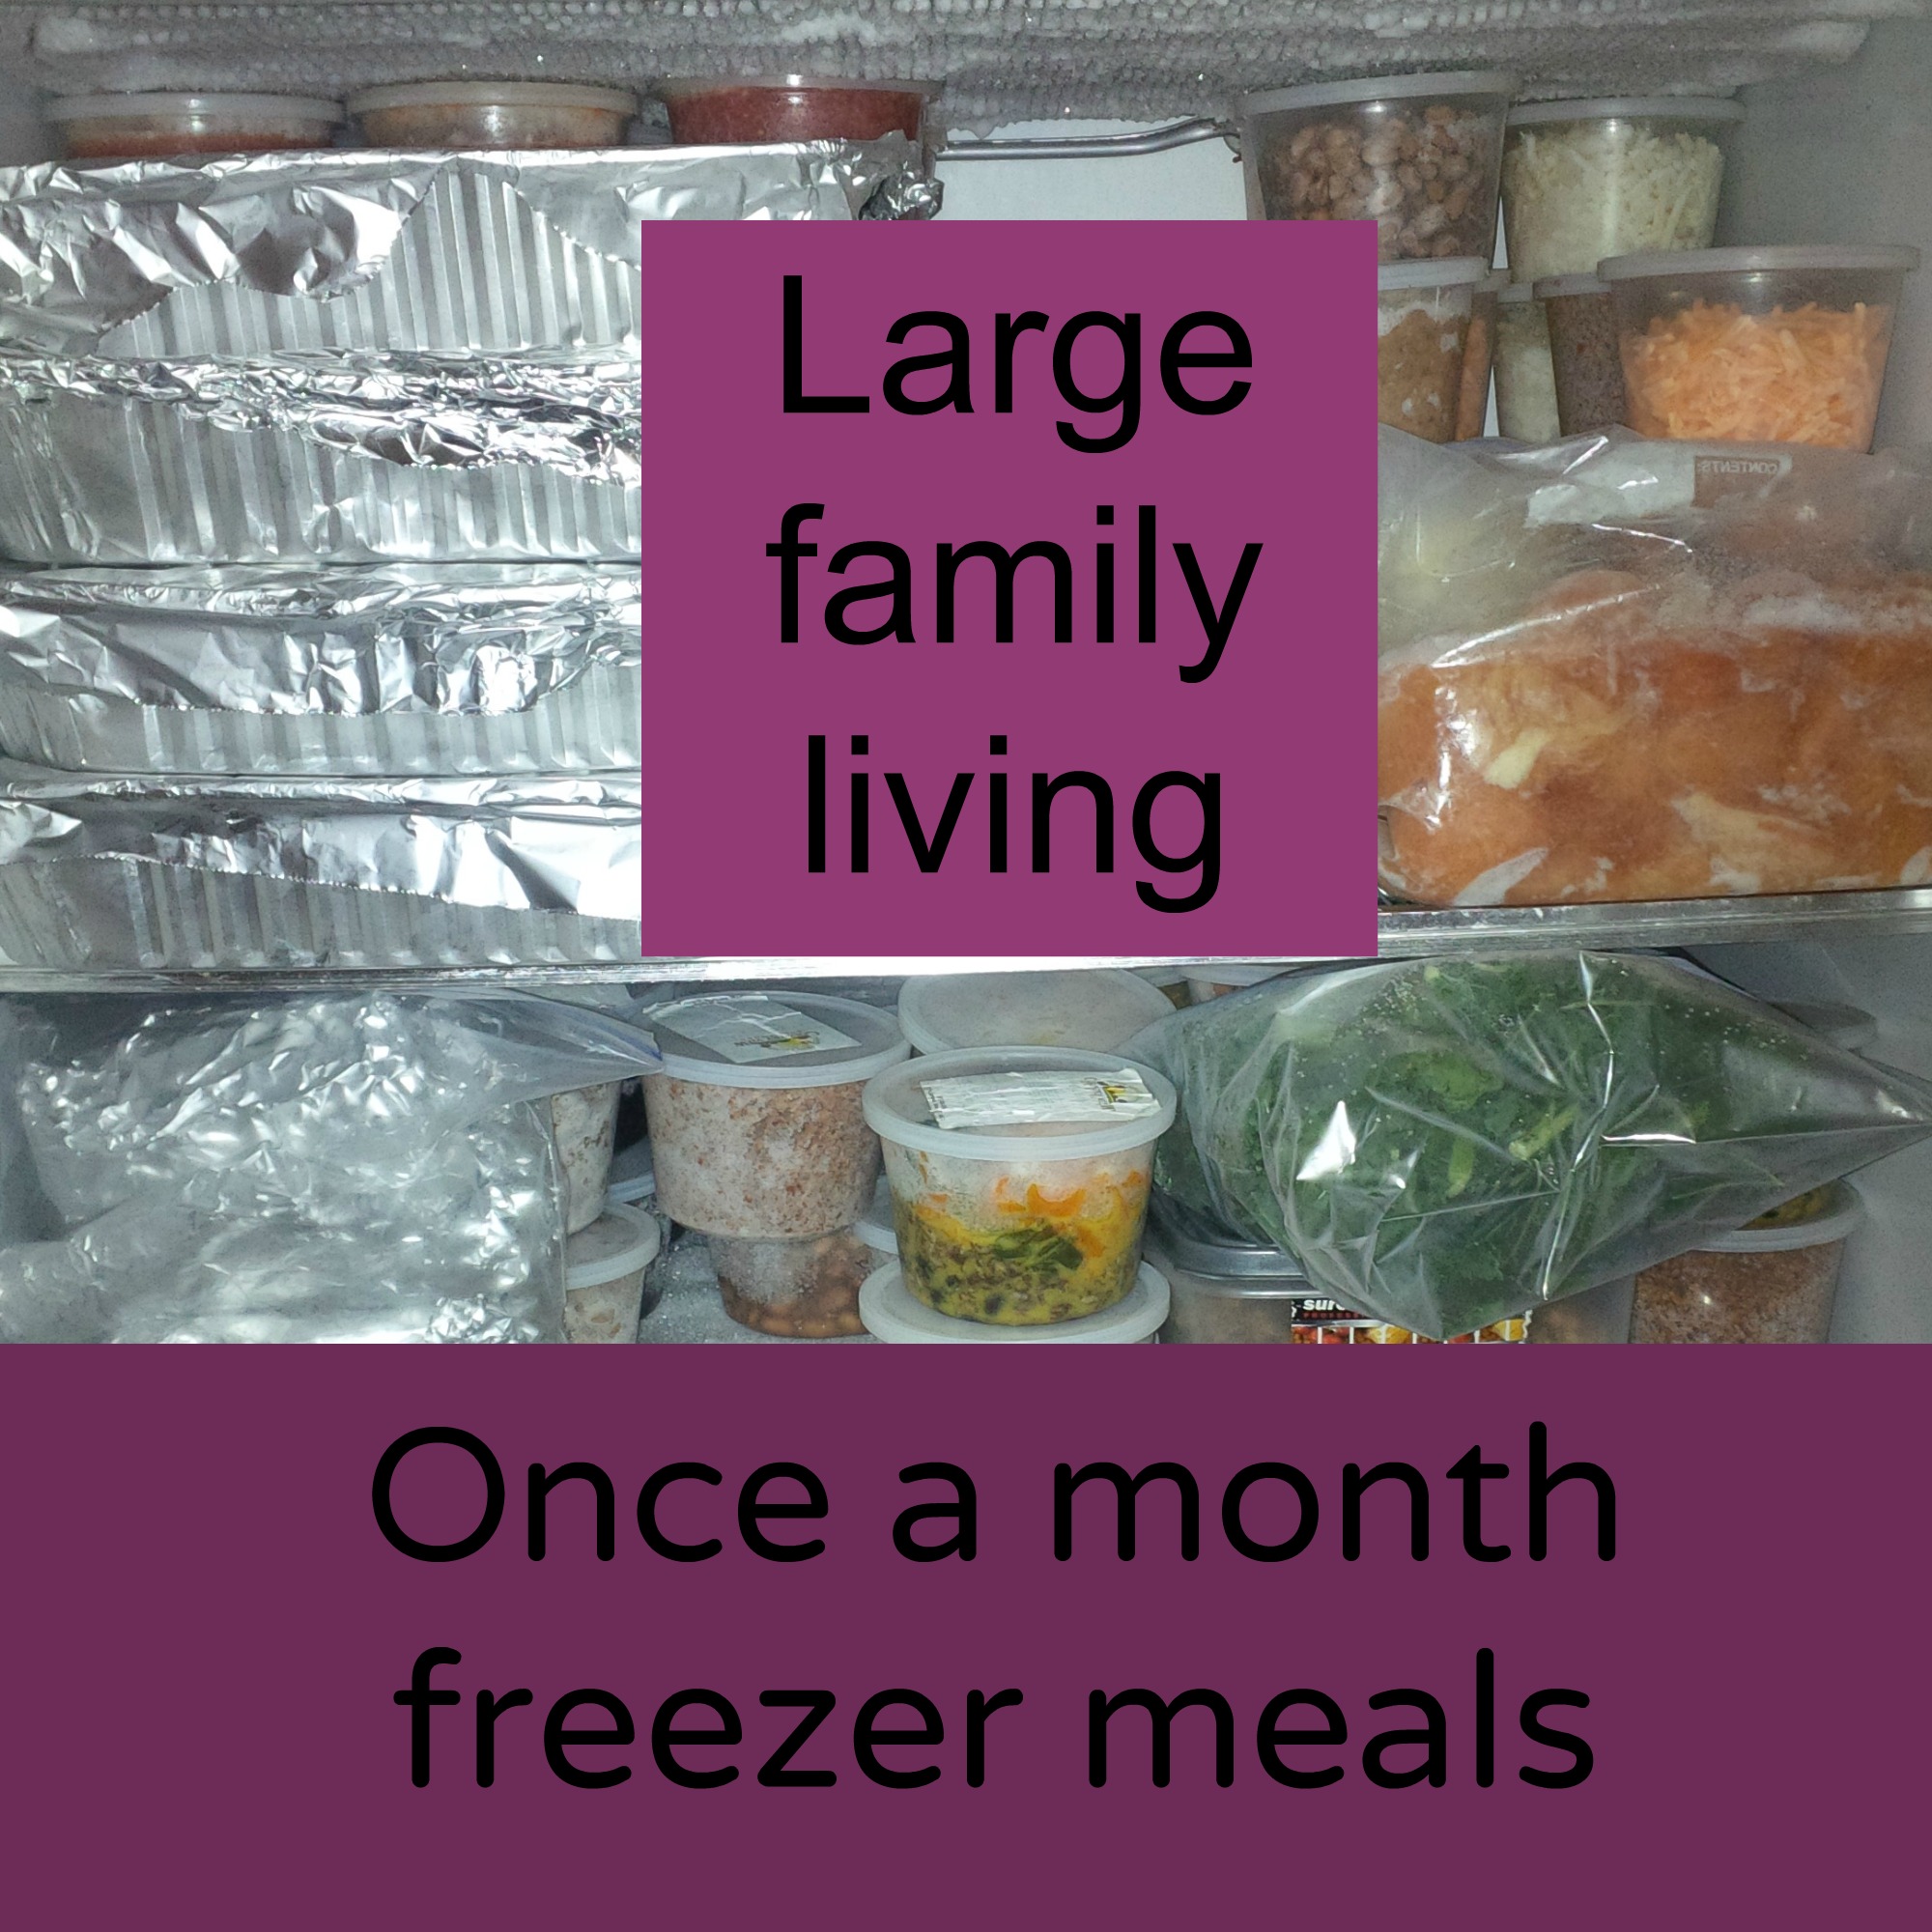 Large family living …Once a month freezer meals part 2 | Plain and not ...